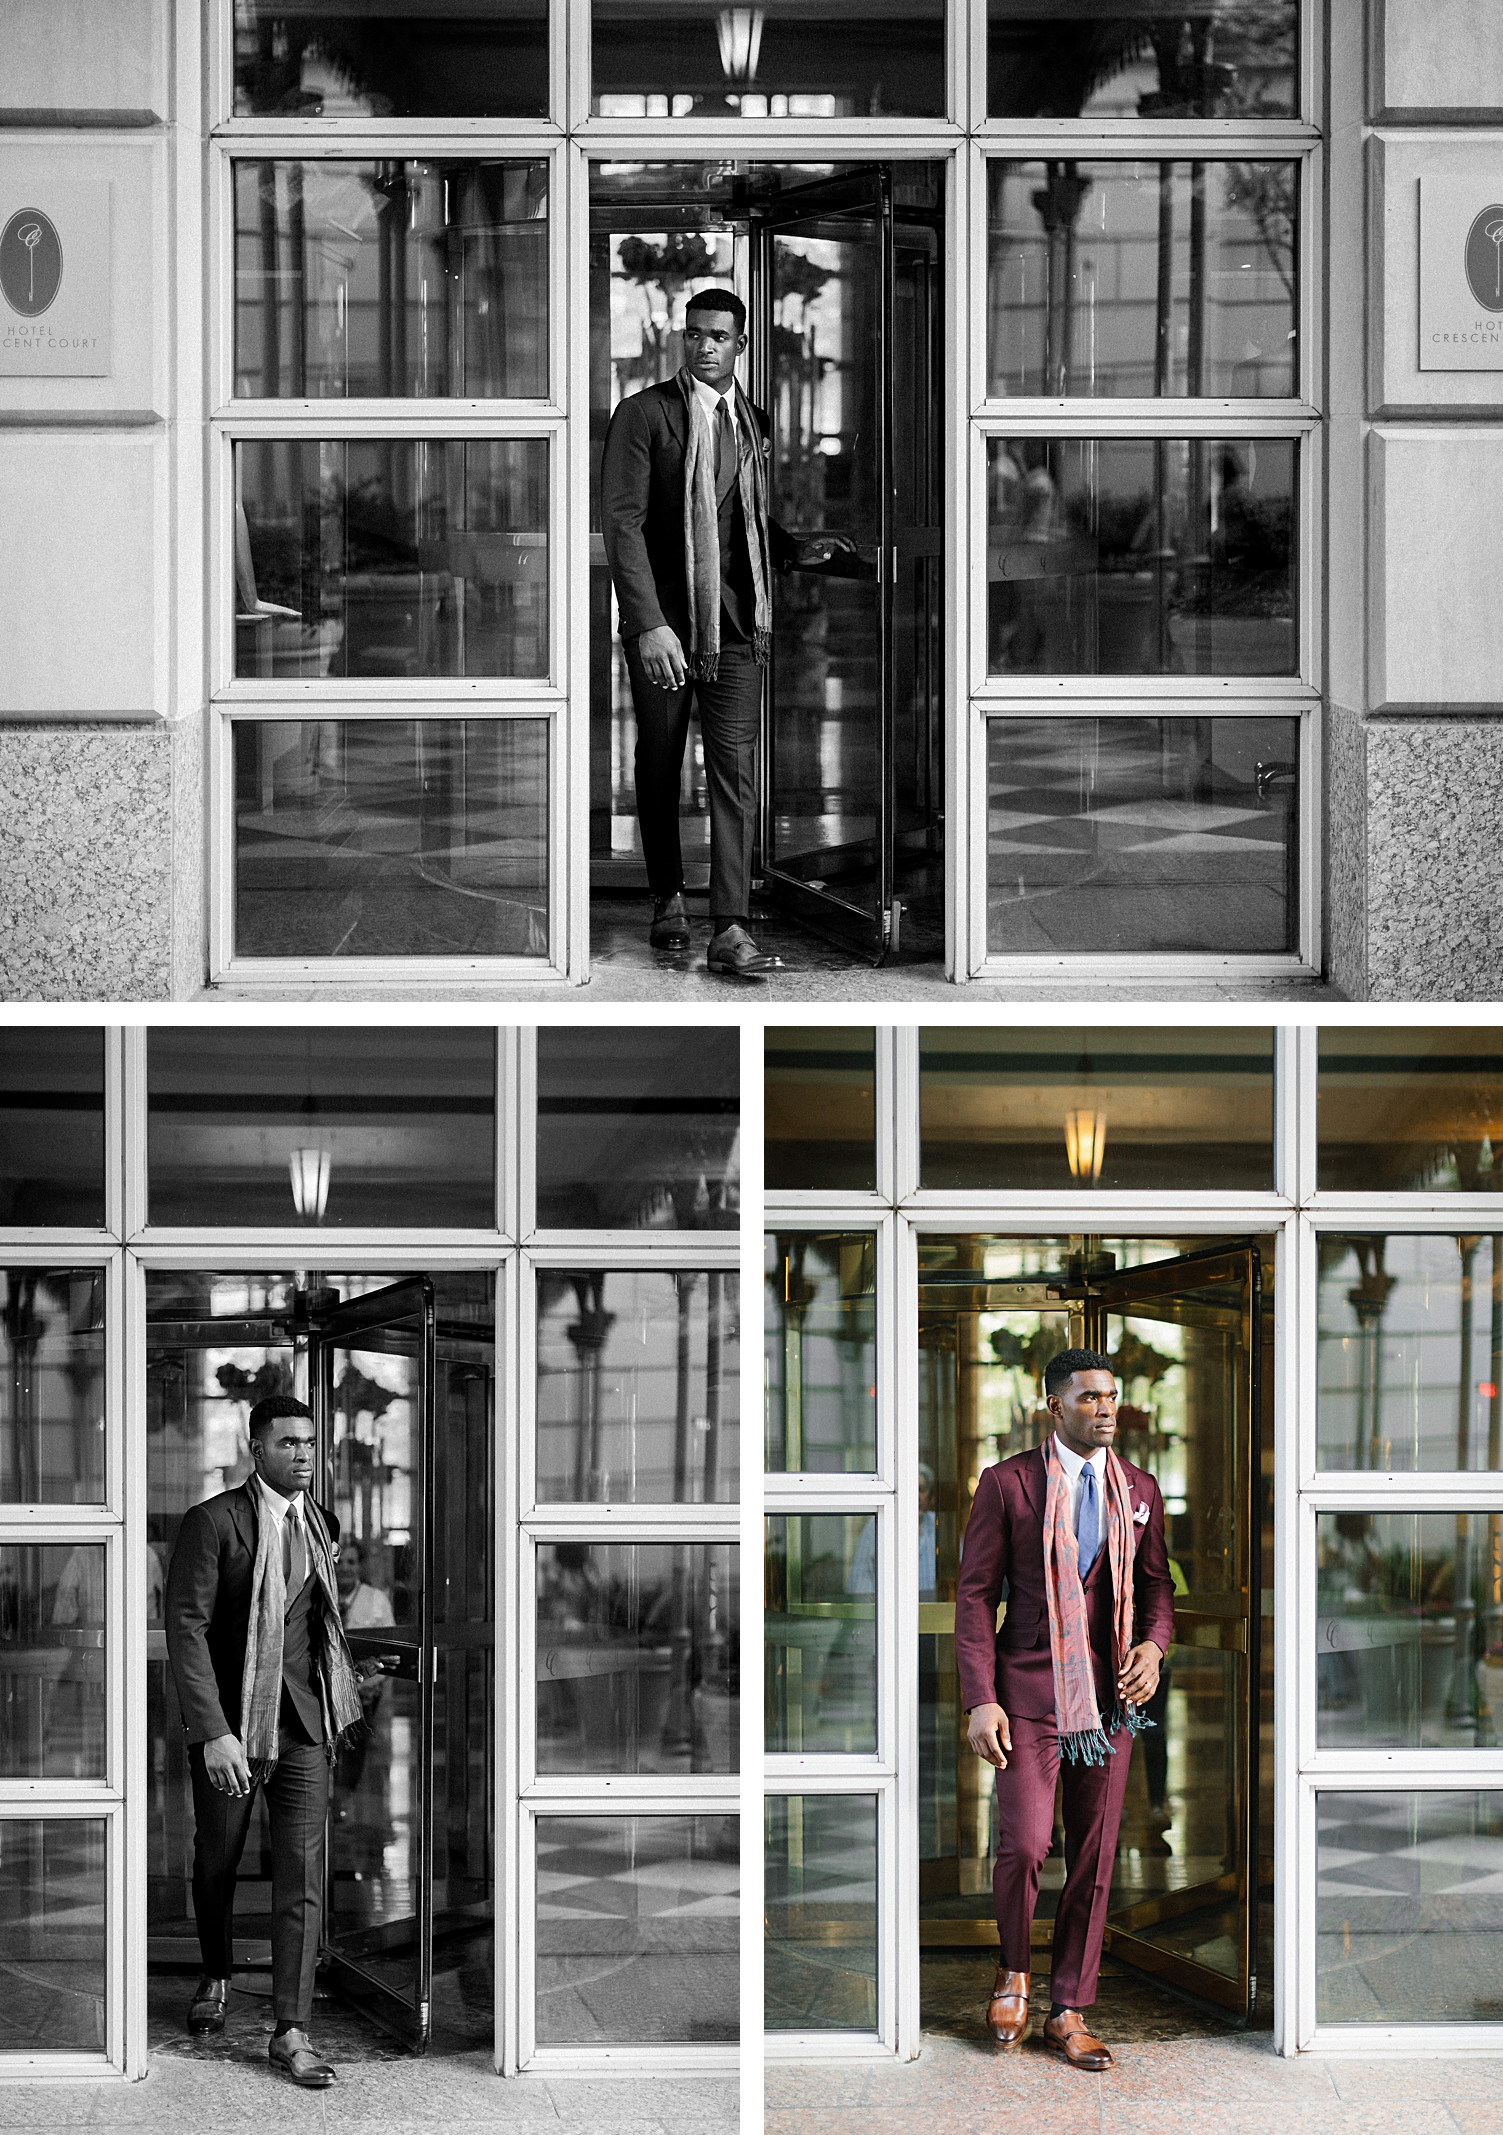 Man in Maroon suit and scarf walking out of revolving door